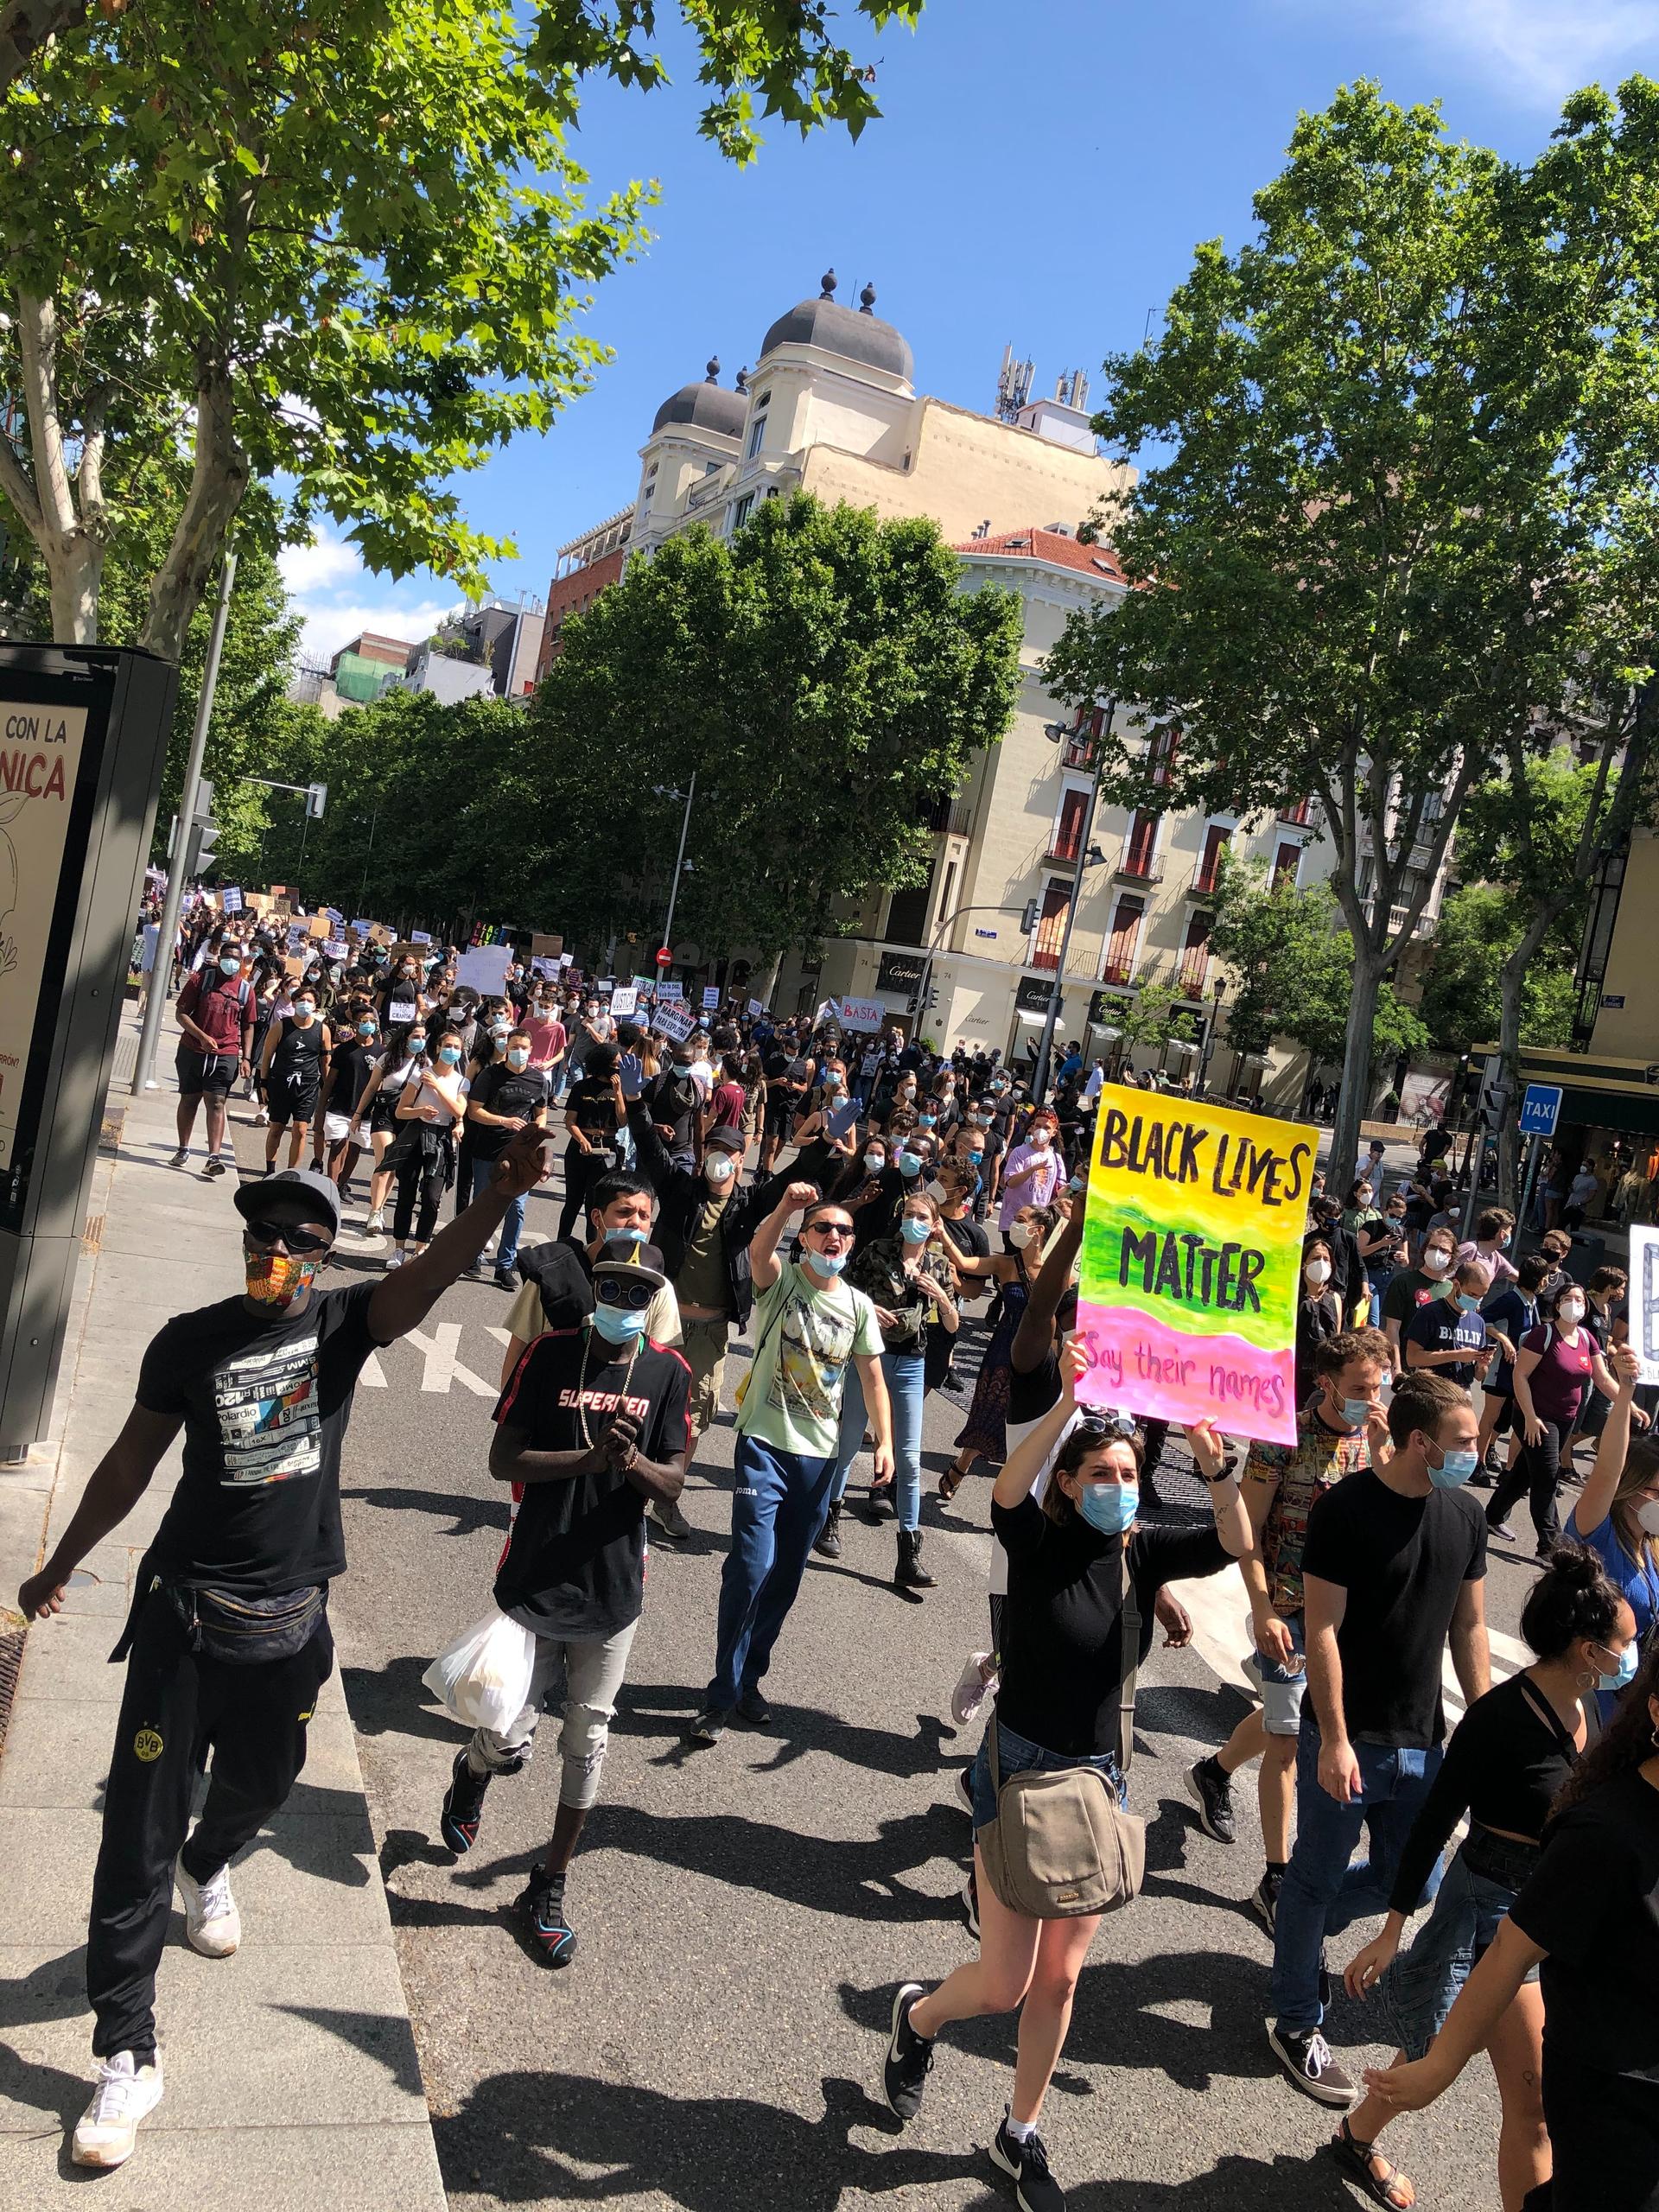 Protesters marched on June 7 in Madrid, Spain, holding signs with anti-racist slogans.